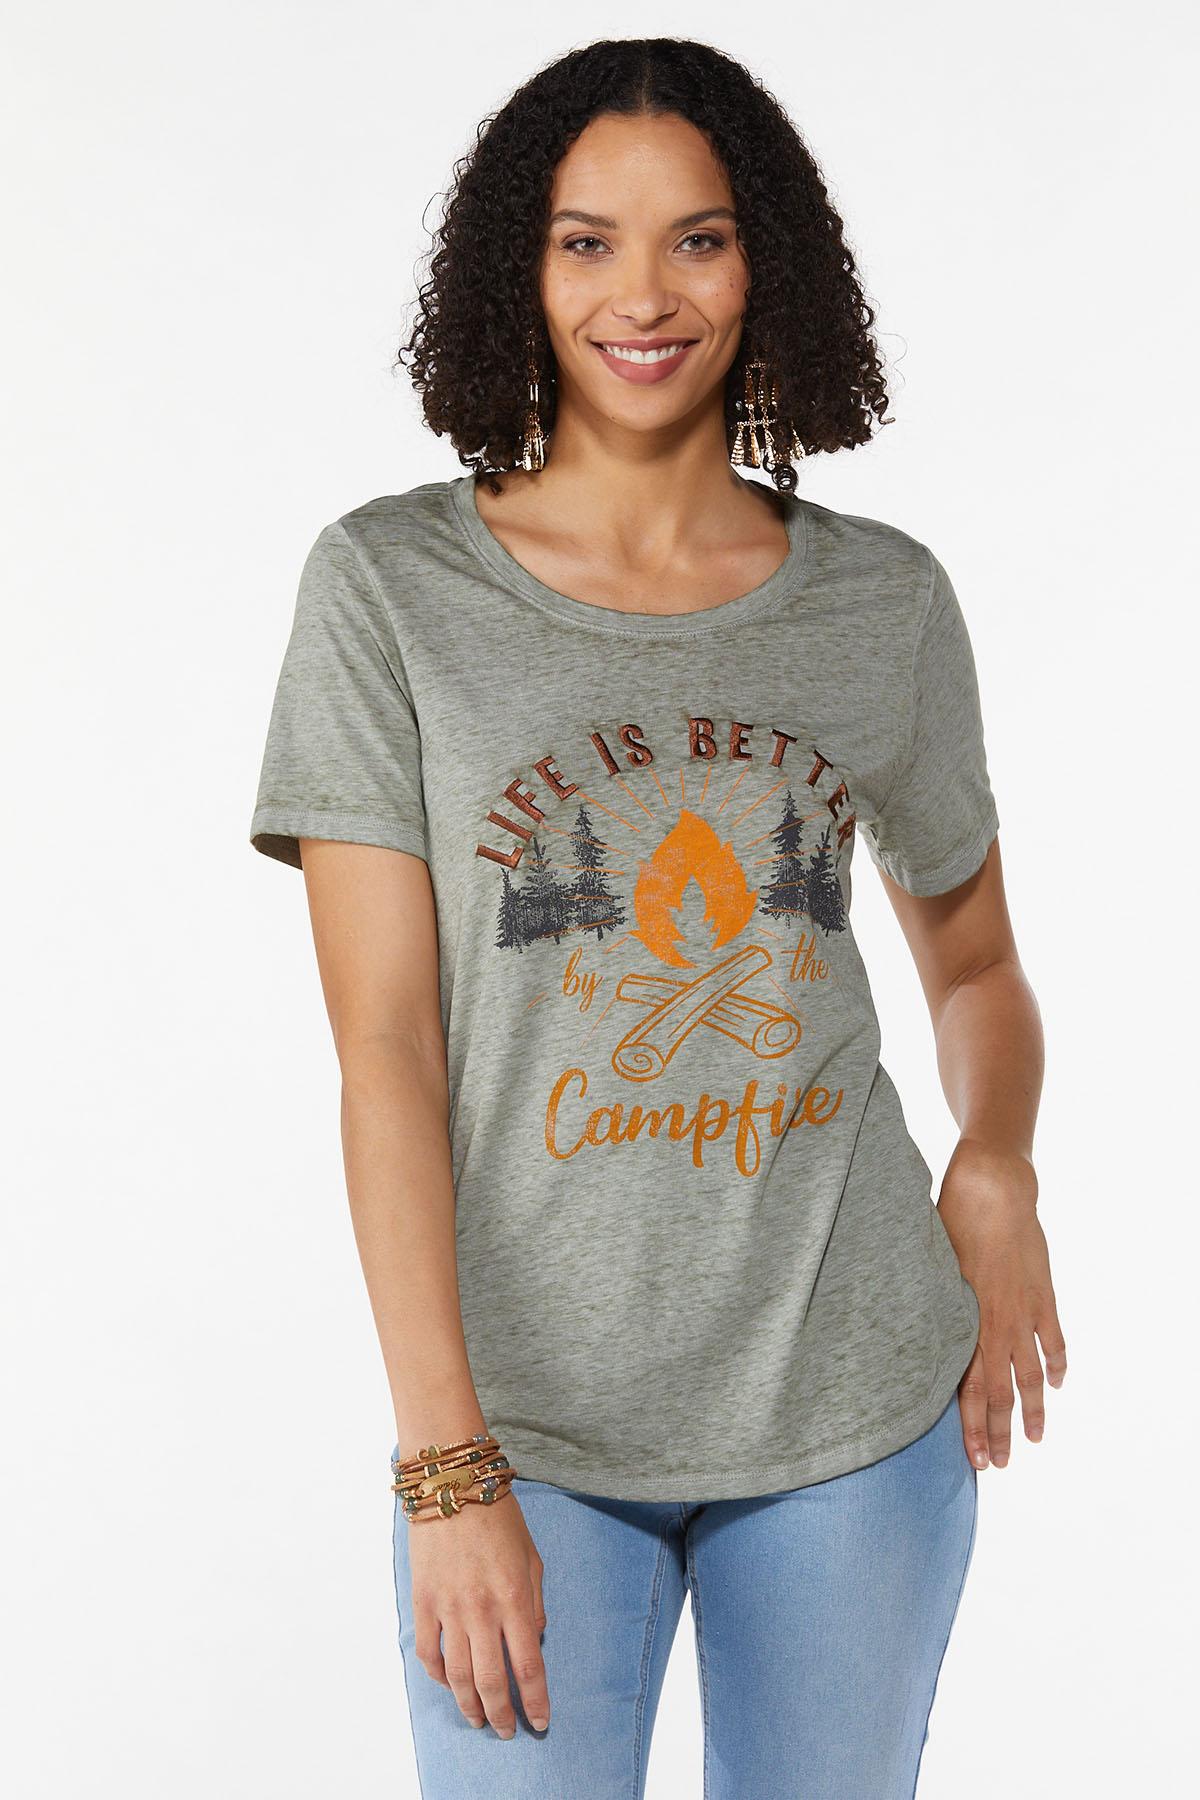 Better By Campfire Tee